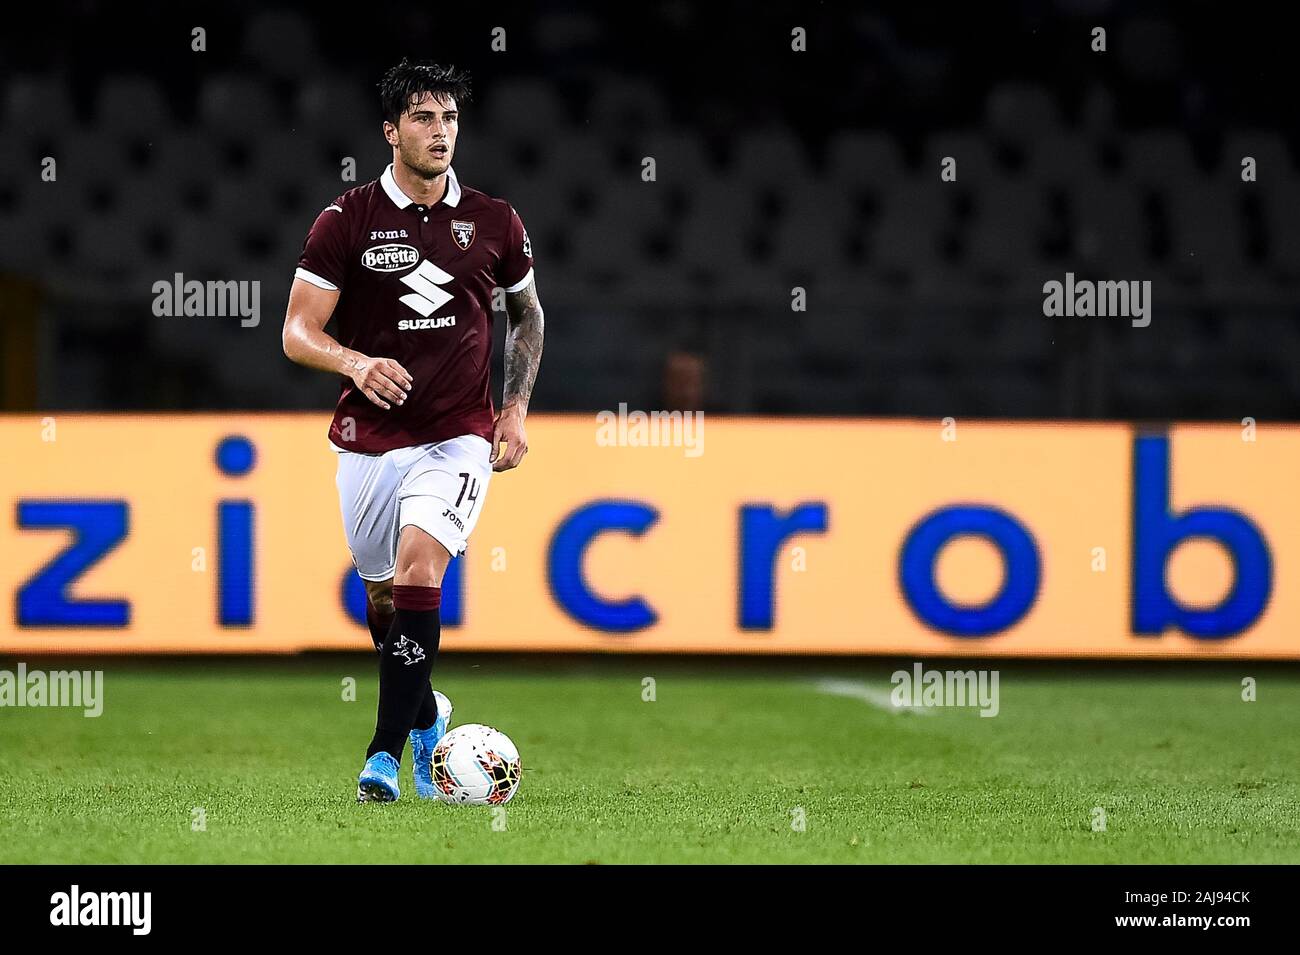 Turin, Italy. 8 August, 2019: Kevin Bonifazi of Torino FC in action during the UEFA Europa League third qualifying round football match between Torino FC and FC Shakhtyor Soligorsk. Torino FC won 5-0 over FC Shakhtyor Soligorsk. Credit: Nicolò Campo/Alamy Live News Stock Photo